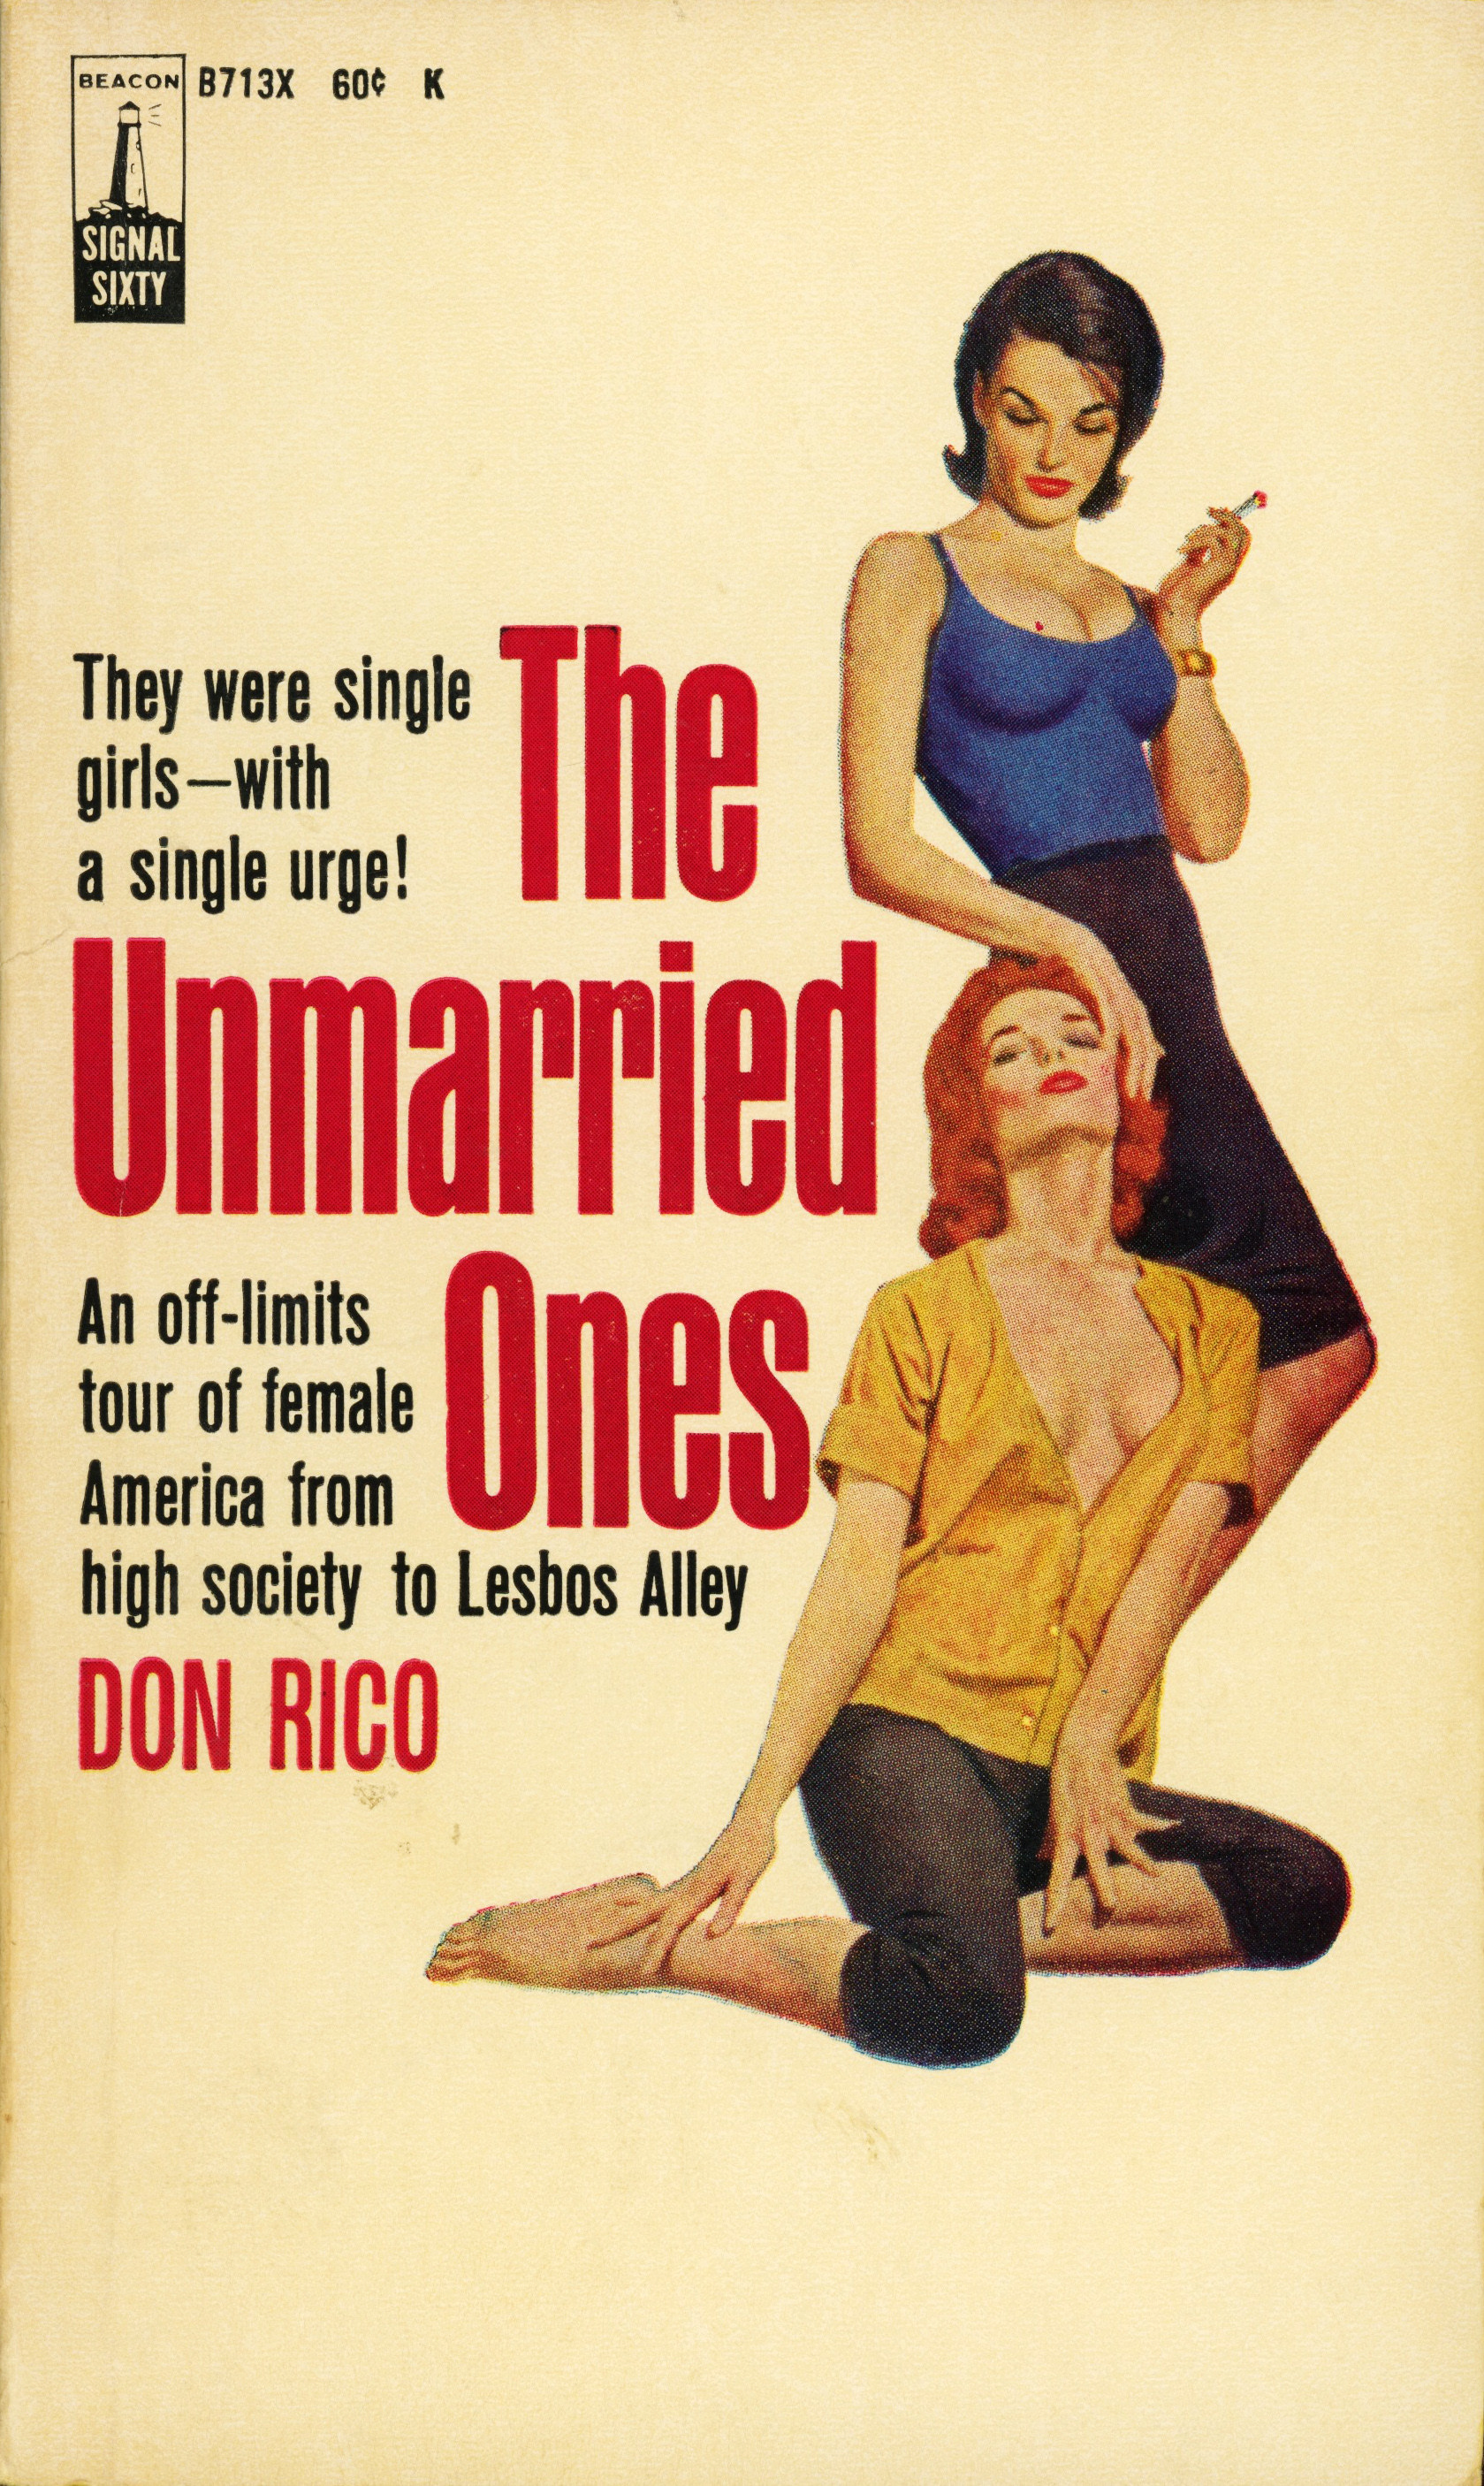 15281824638-beacon-books-b713x-don-rico-the-unmarried-ones